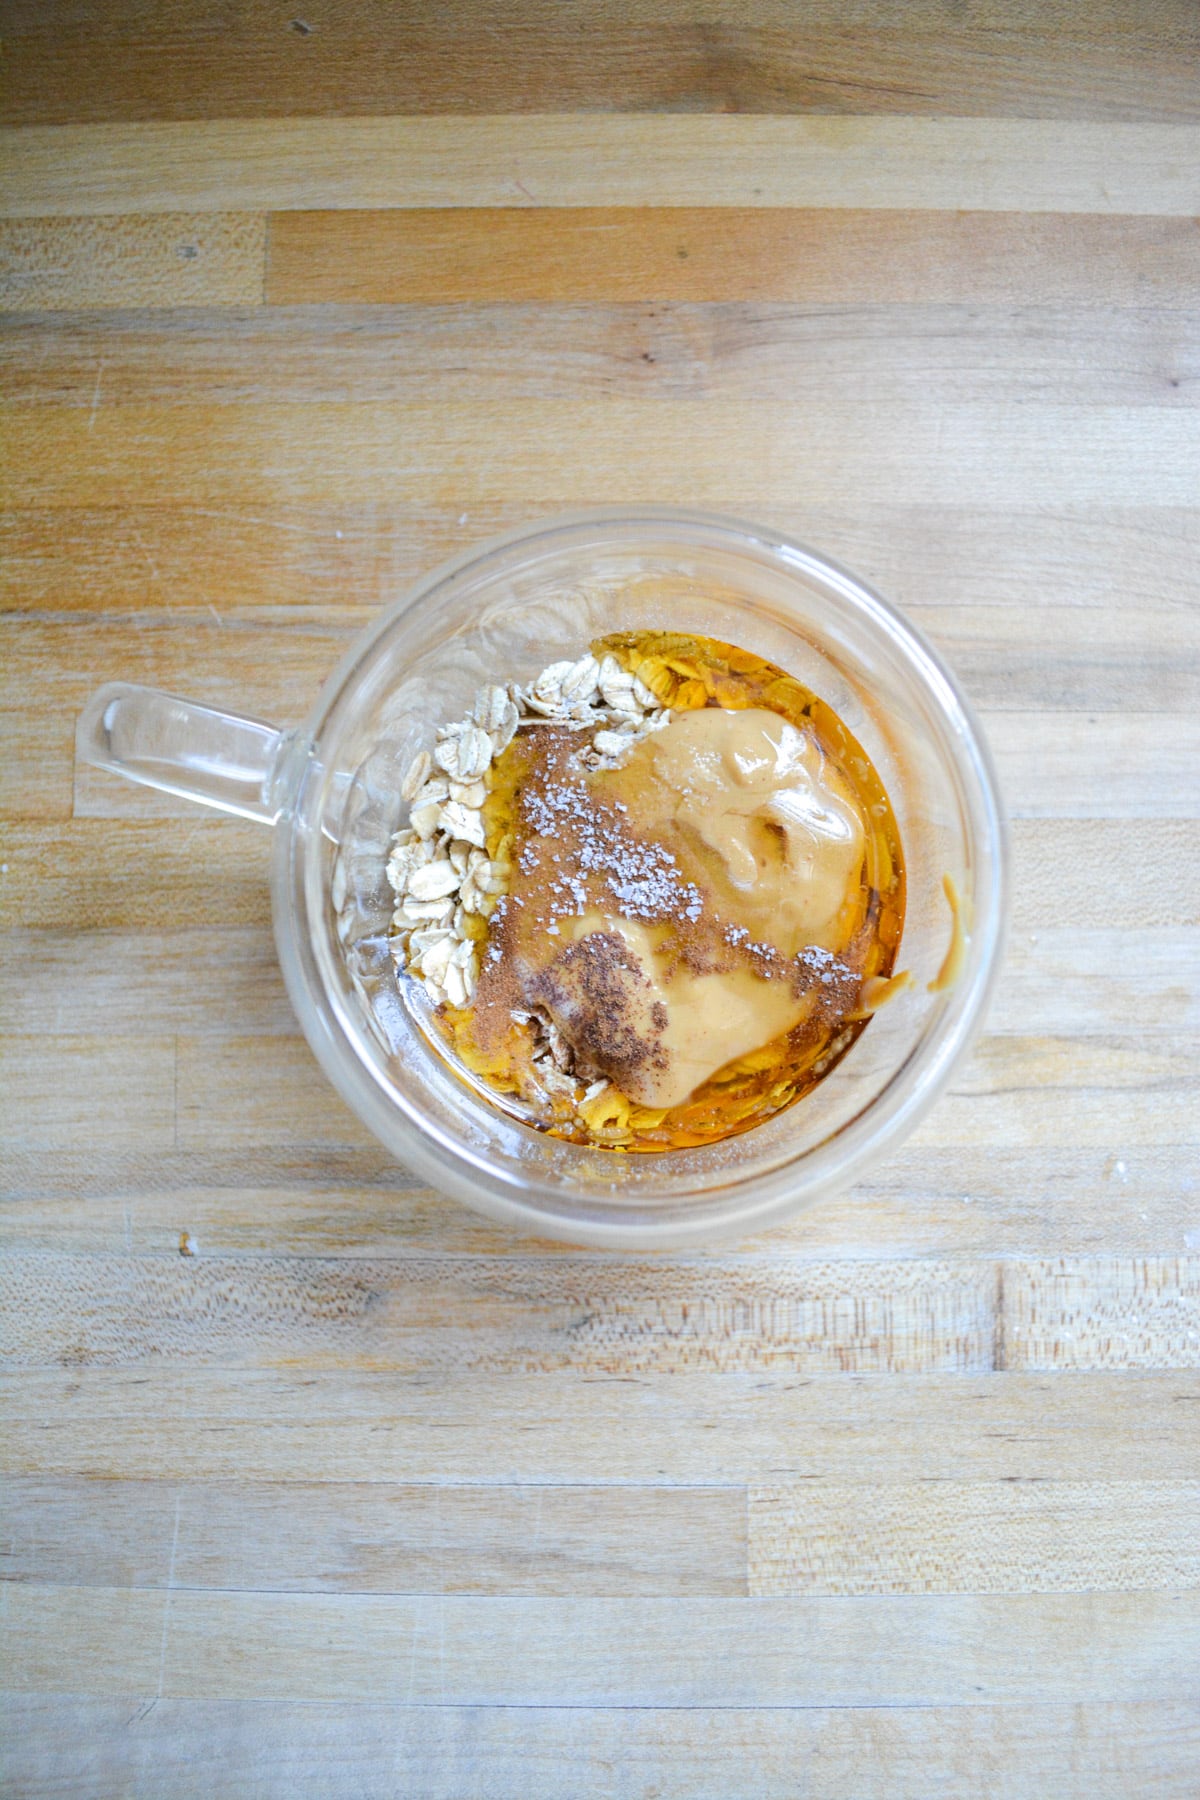 Rolled oats, nut butter and maple syrup in a small glass cup.